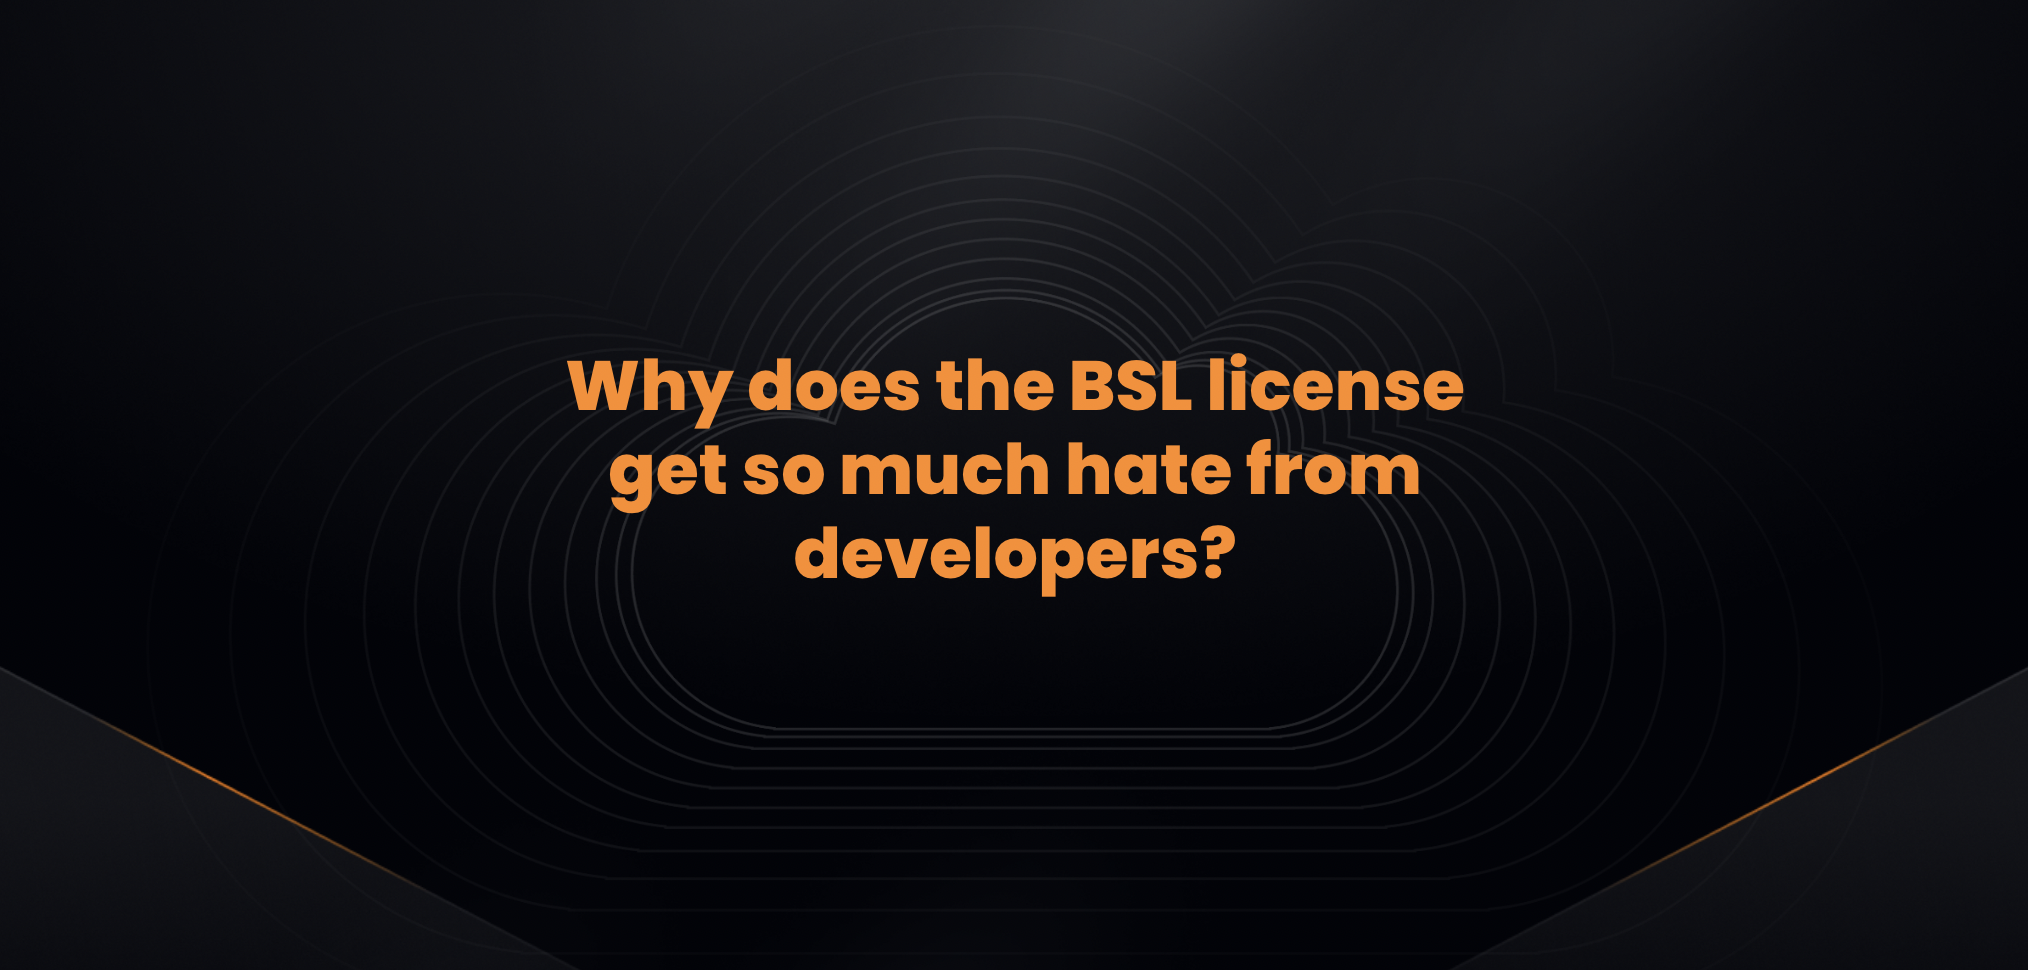 Why does the BSL license get so much hate from developers?